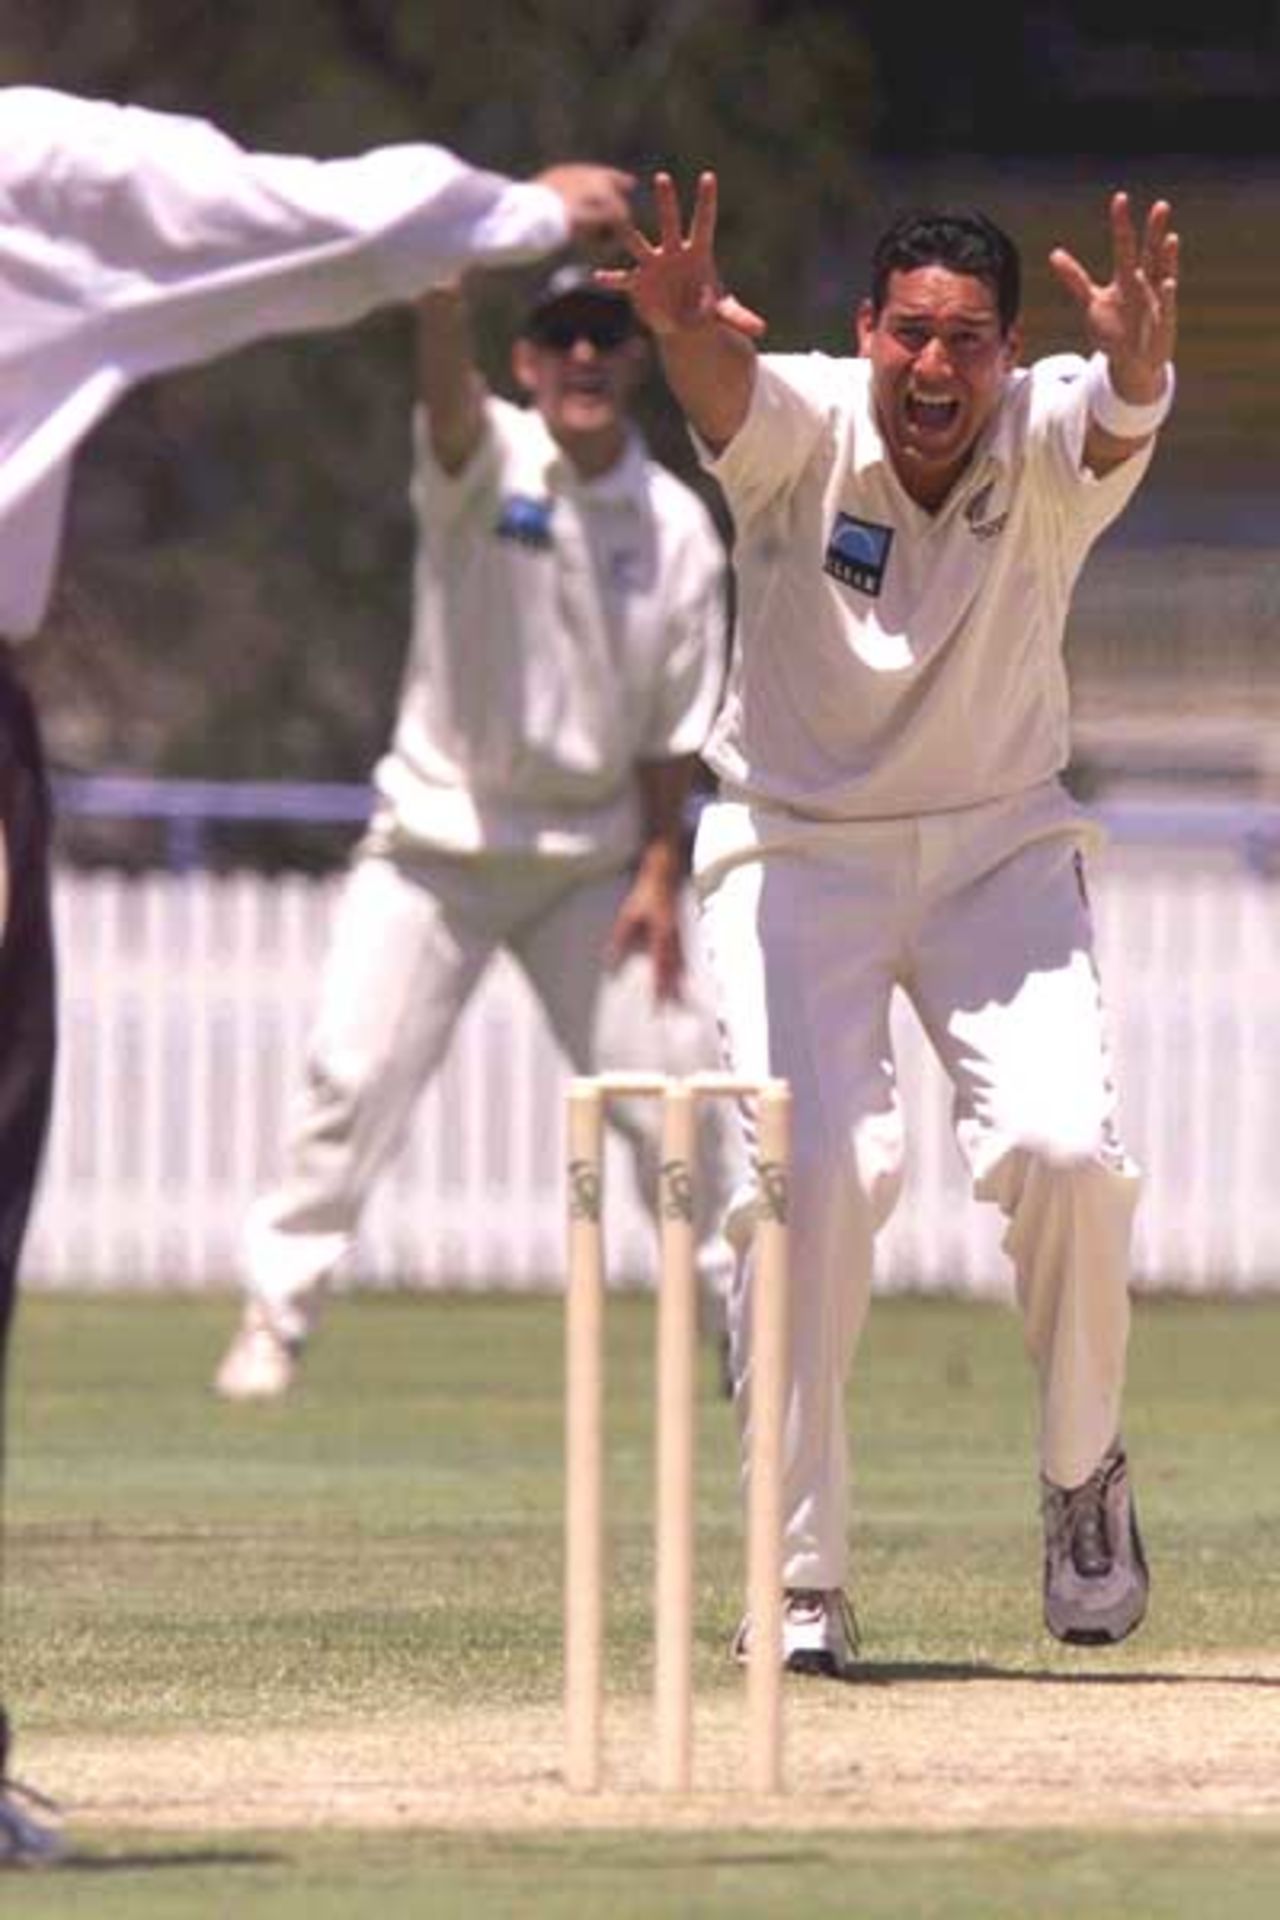 18 Oct 2001: Daryl Tuffey of New Zealand takes the wicket of Chris Simpson of Queensland for lbw during the match between New Zealand and the Queensland XI played at the Allan Border Field, Brisbane, Australia.